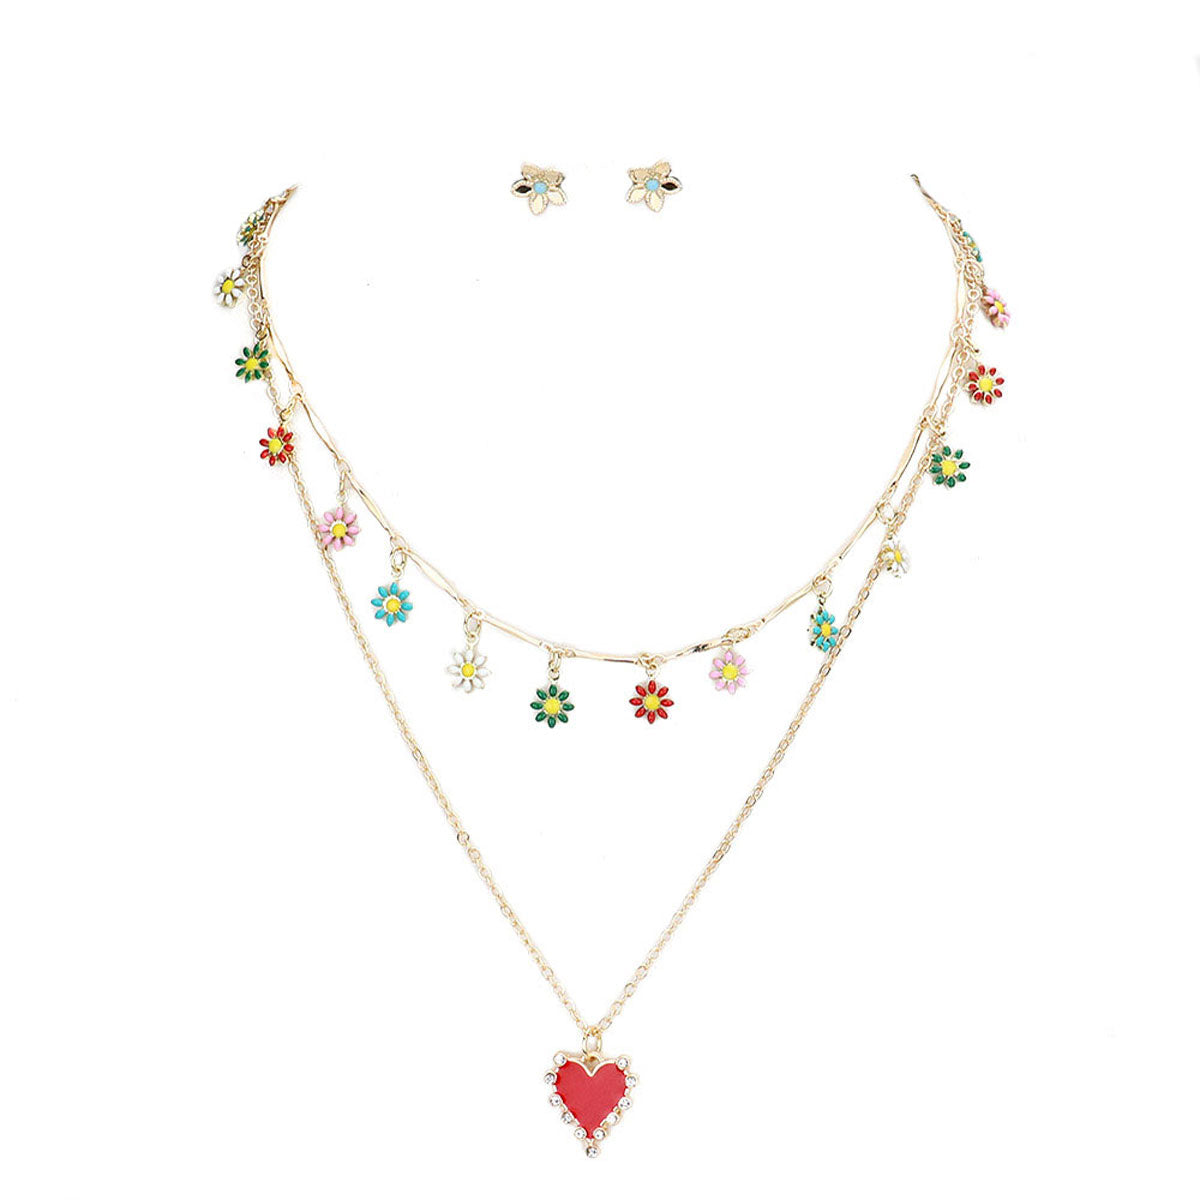 Multi Enamel Flower Station Rhinestone Trim Heart Pendant Necklaces. Beautifully crafted design adds a gorgeous glow to any outfit. Jewelry that fits your lifestyle! Perfect Birthday Gift, Anniversary Gift, Mother's Day Gift, Anniversary Gift, Graduation Gift, Prom Jewelry, Just Because Gift, Thank you Gift.